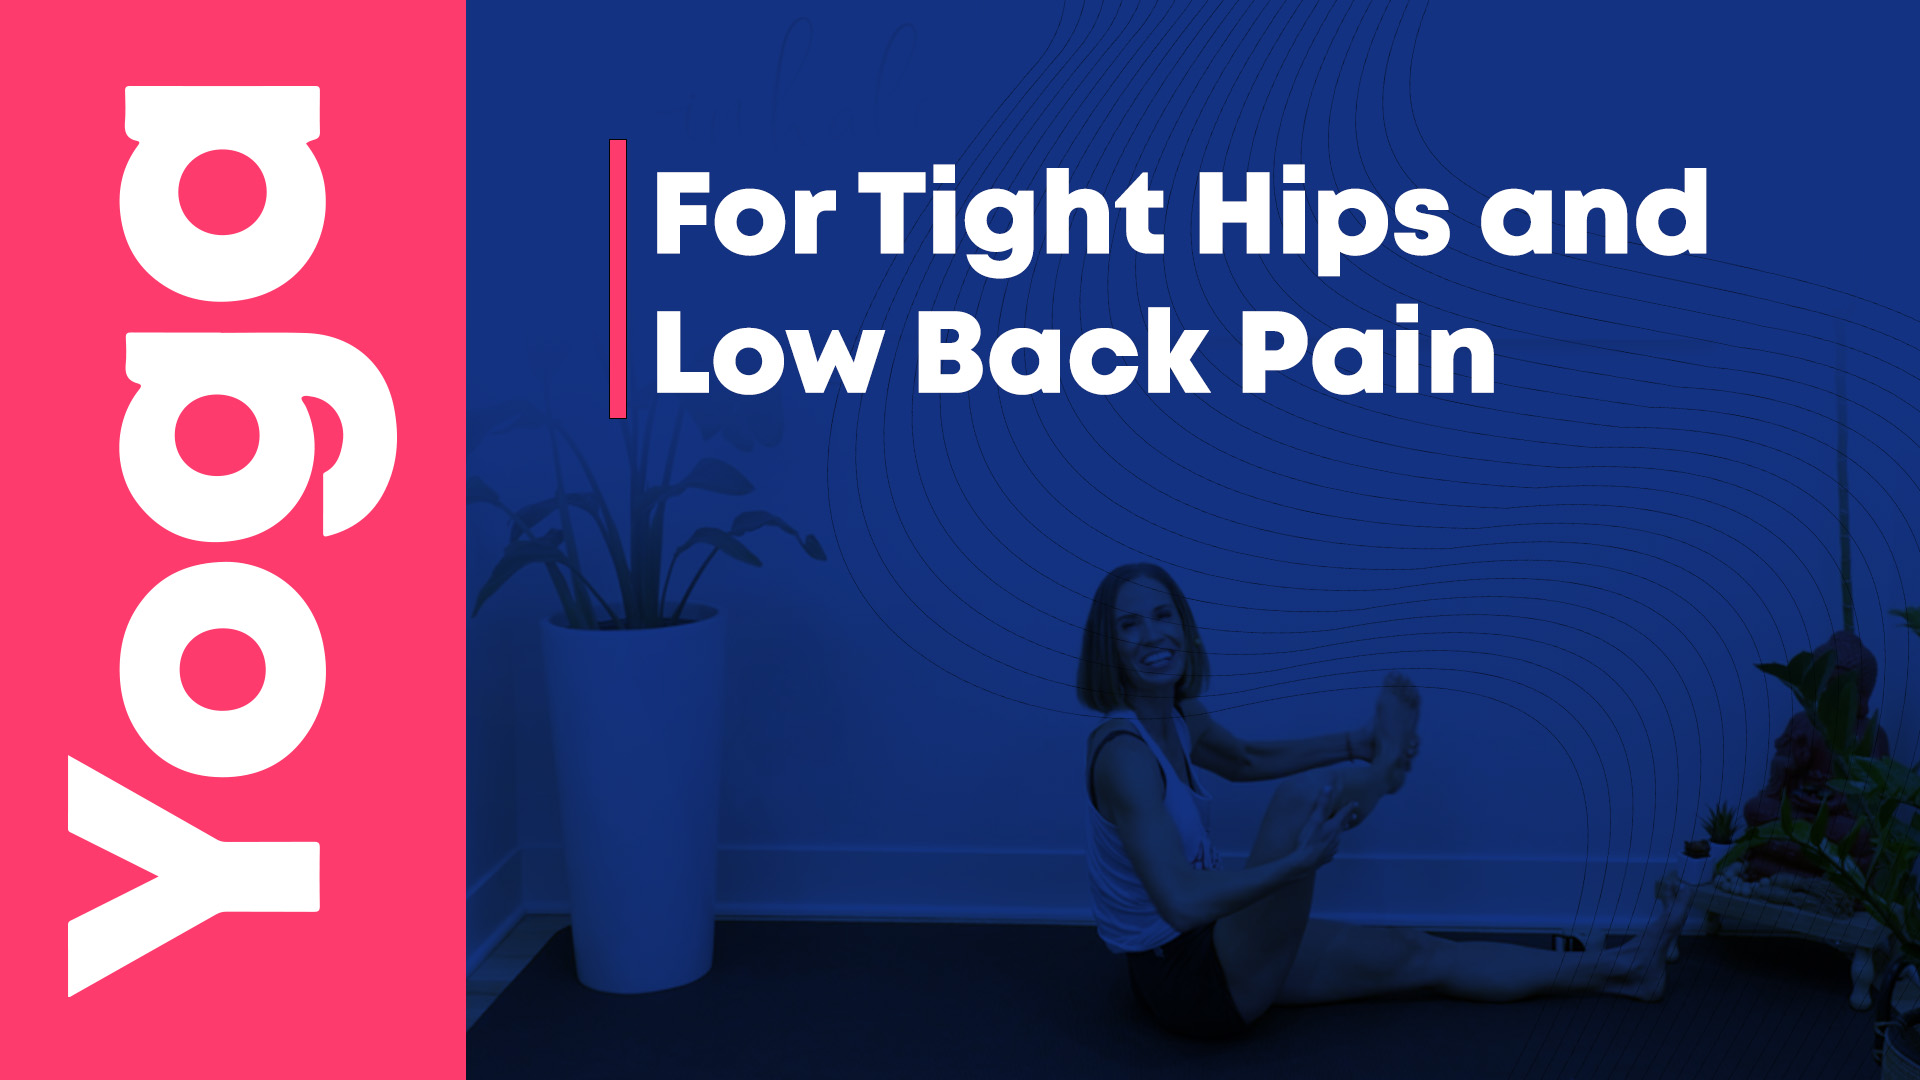 Yoga for Tight Hips and Low Back Pain